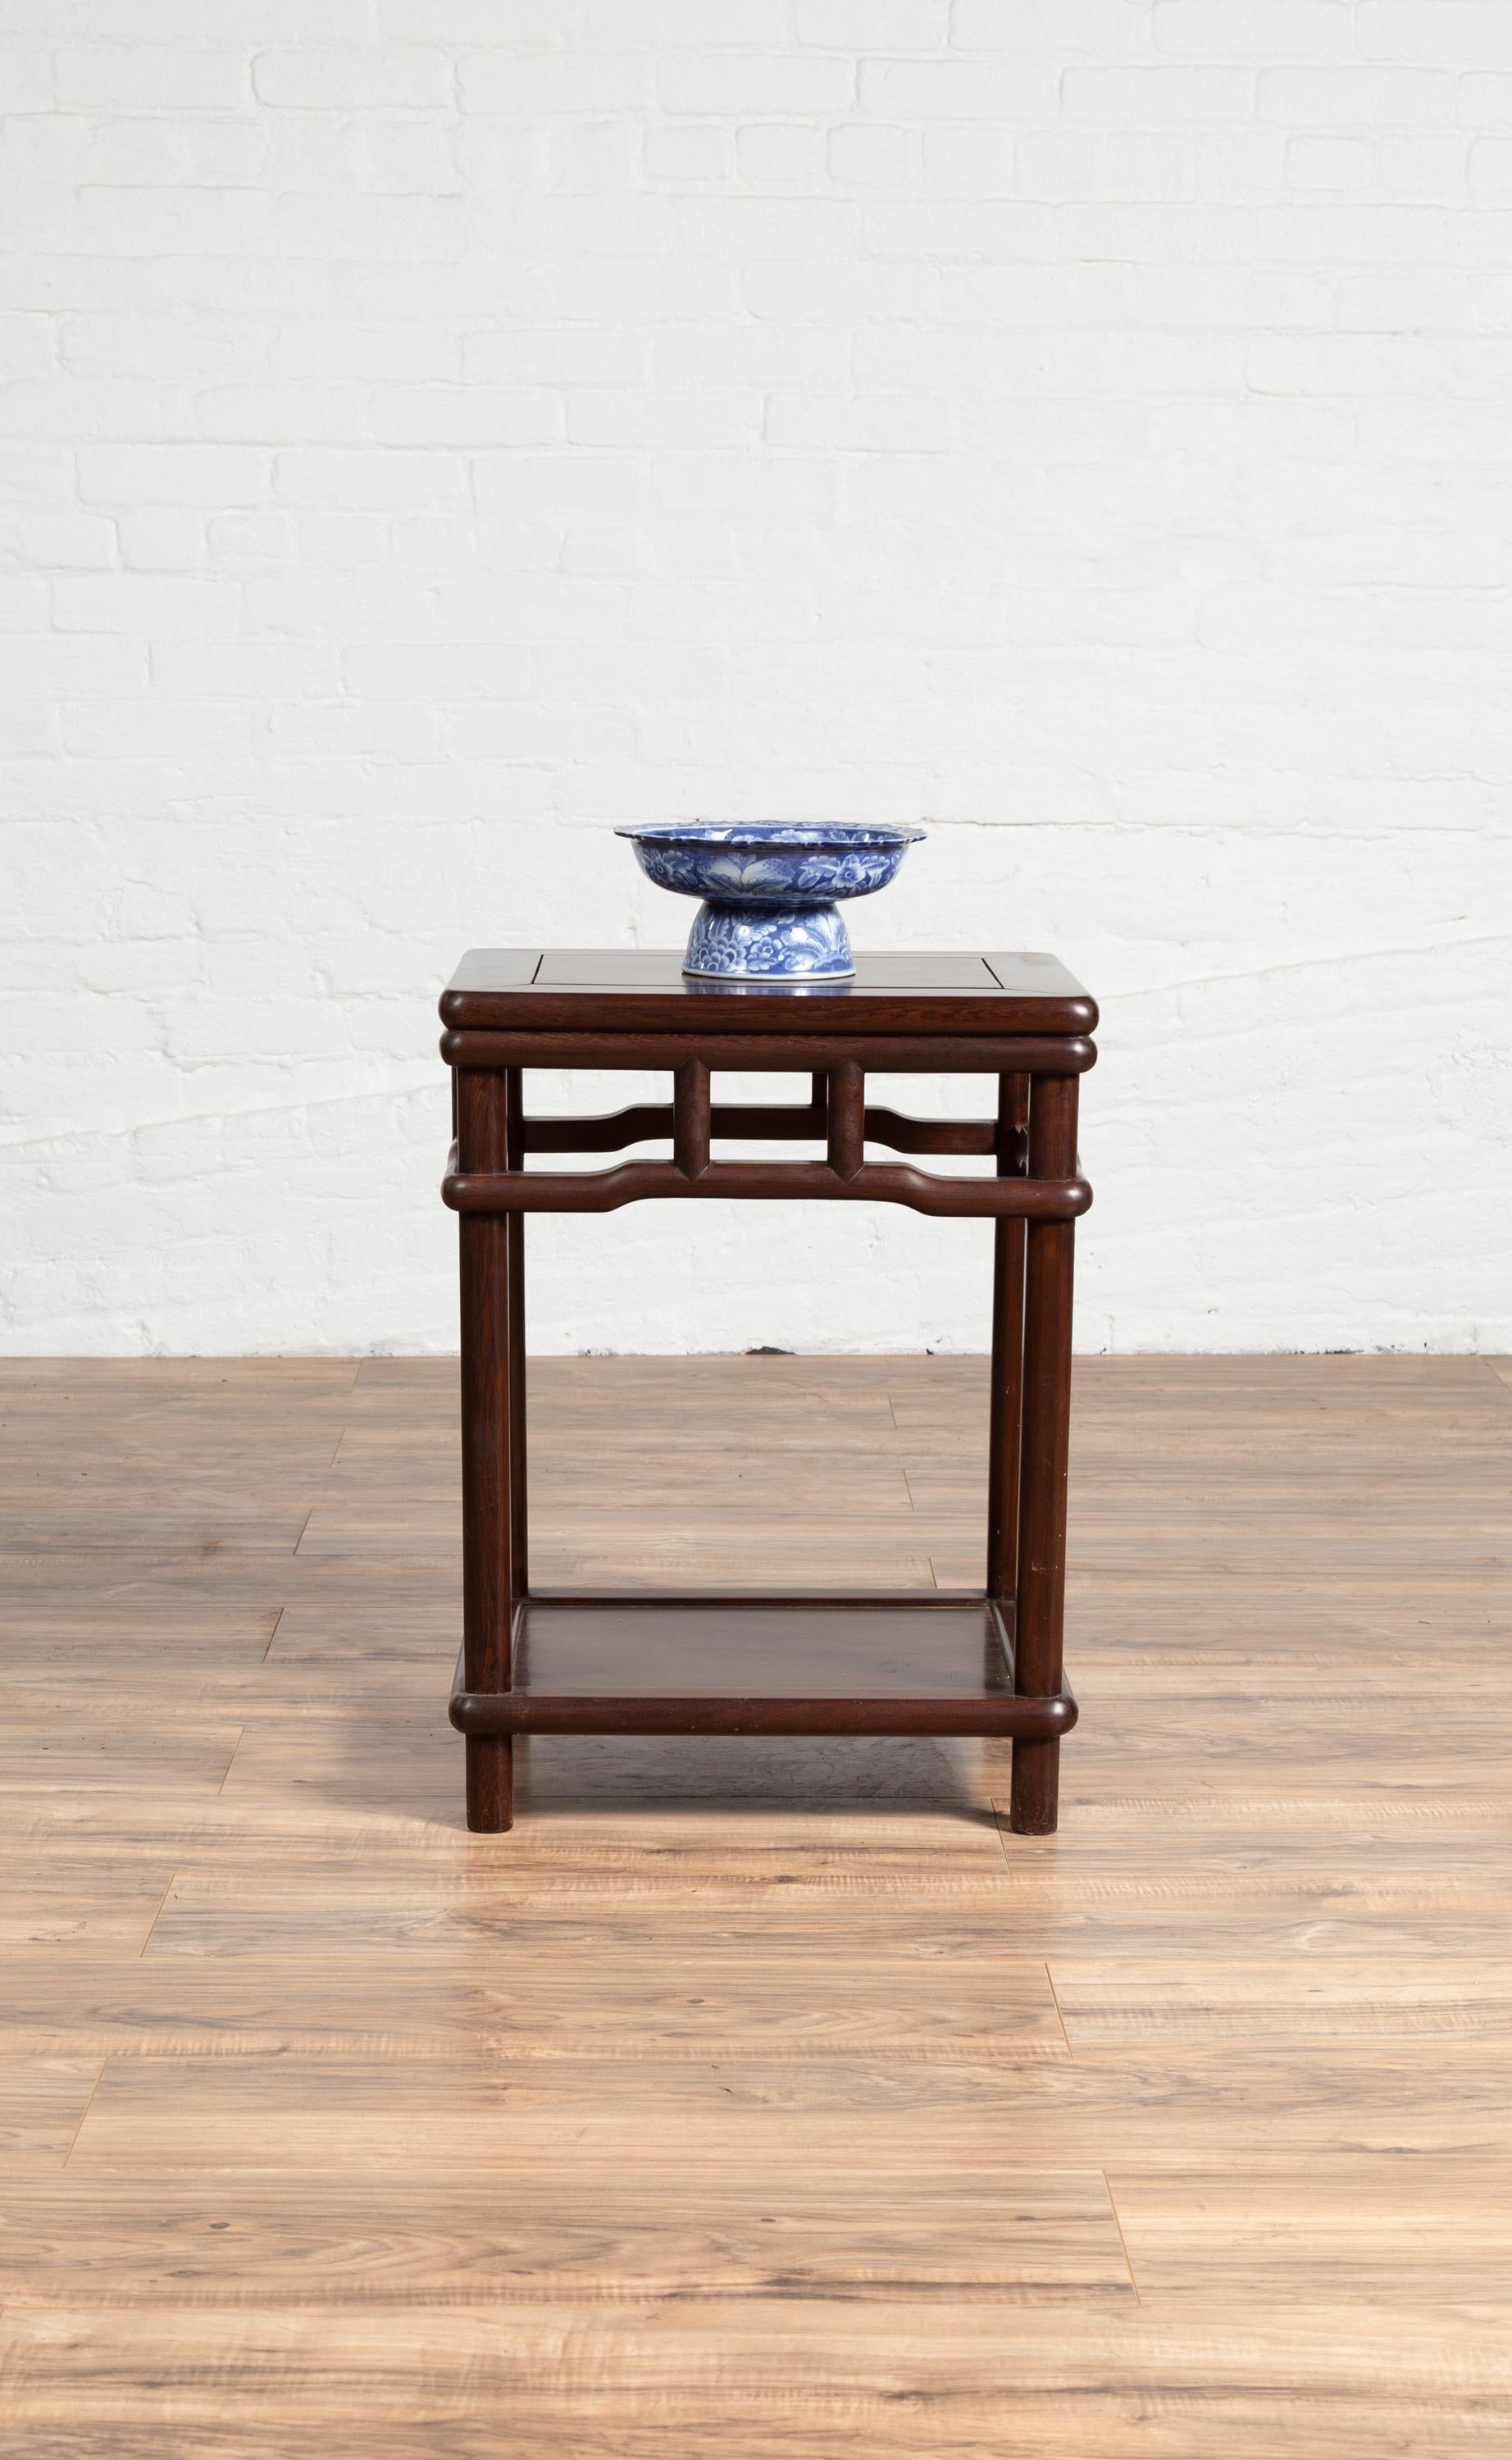 Chinese Ming Style Accent Side Table with Dark Wood Patina and Humpback Apron For Sale 5